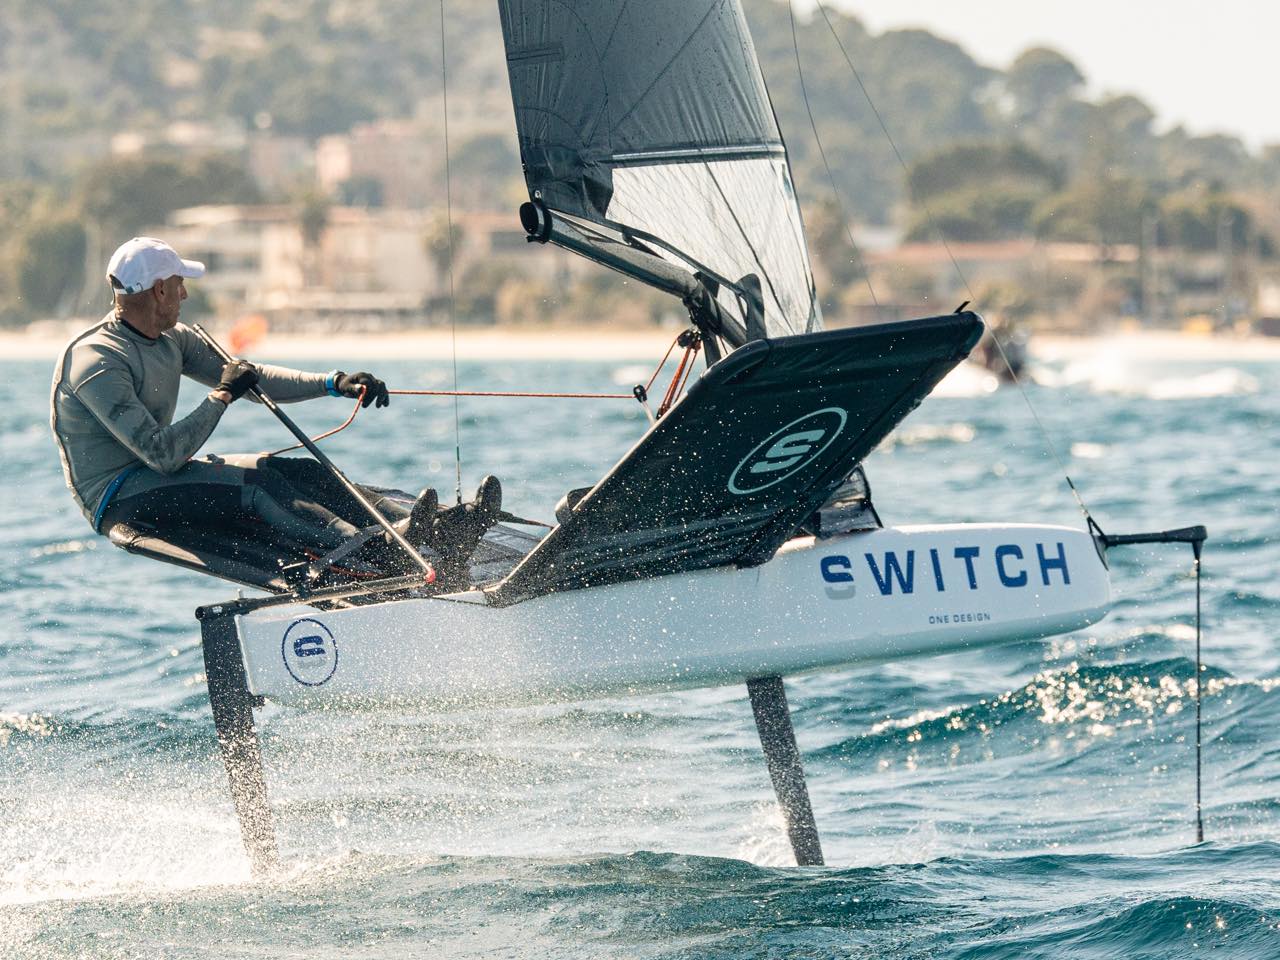 Complete Switch One design boat ready to sail with 8.5 rig